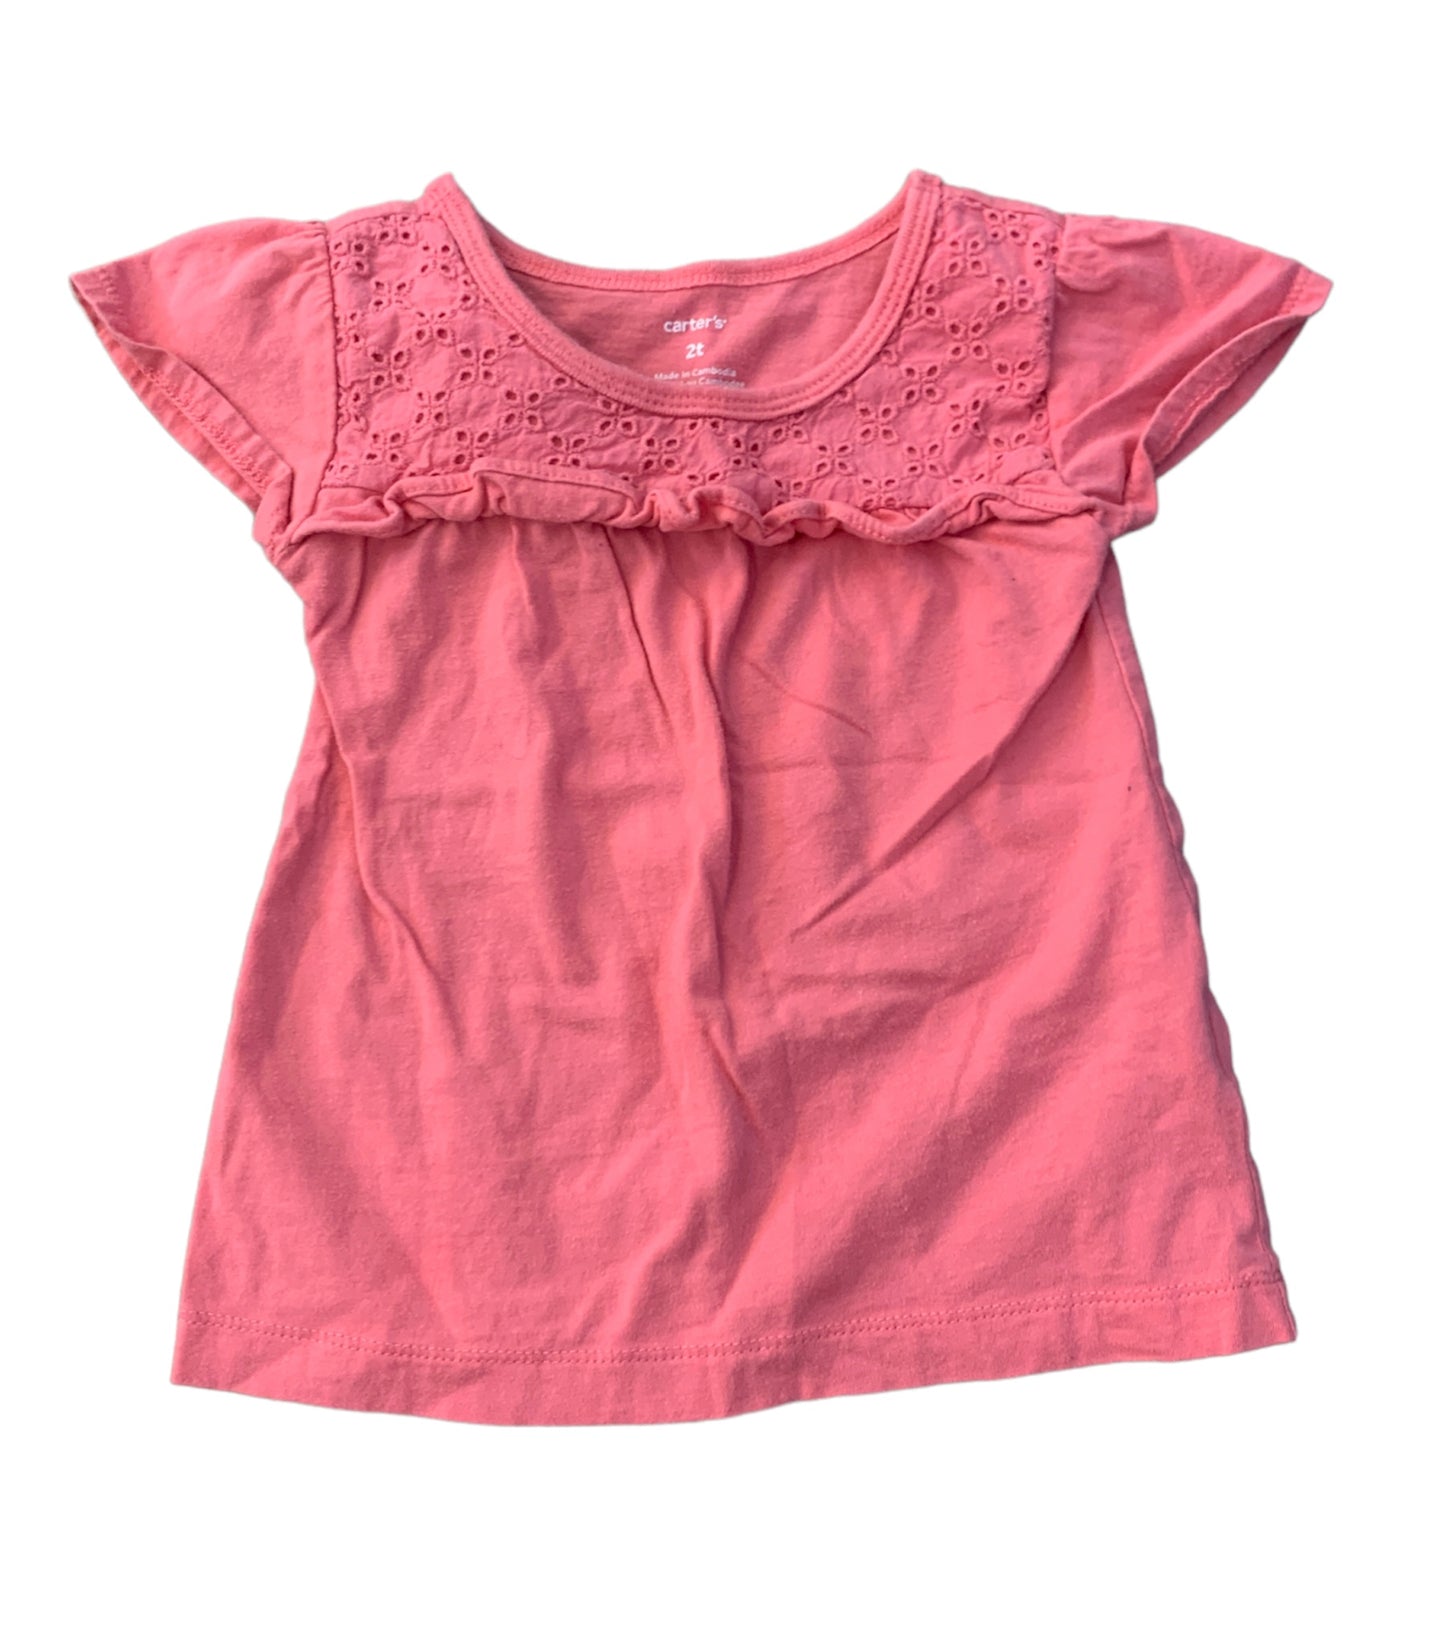 Pretty in Pink T-shirt Size 2T